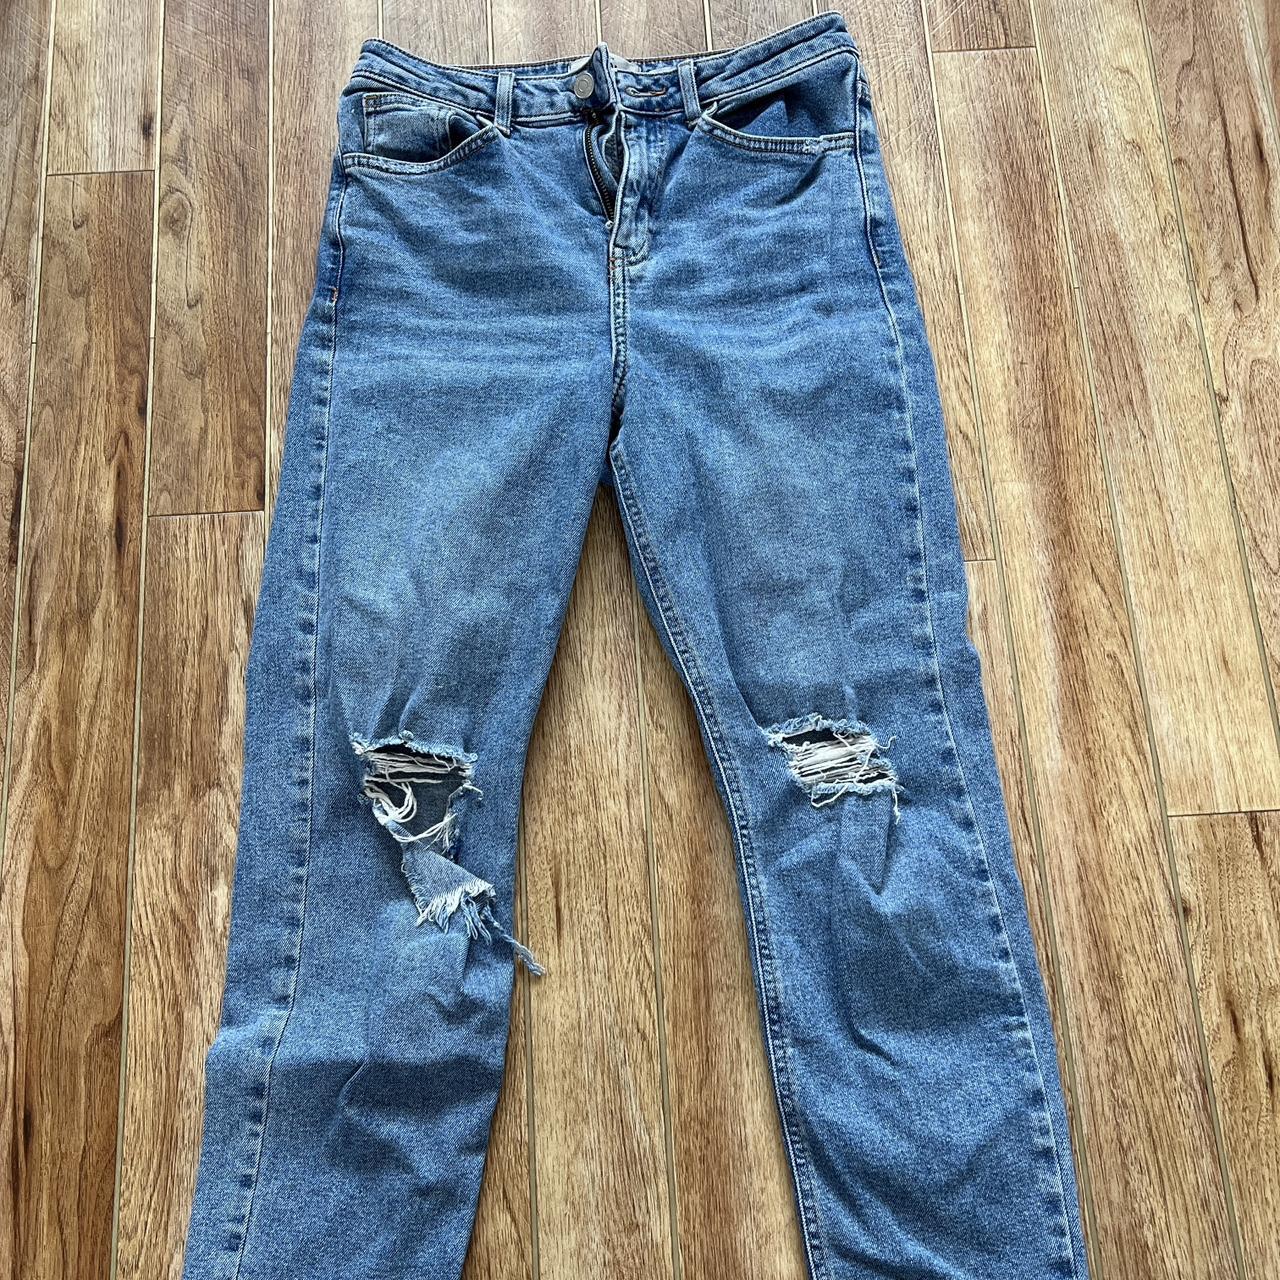 New Look mom jeans worn a few times UK size 6 wee... - Depop